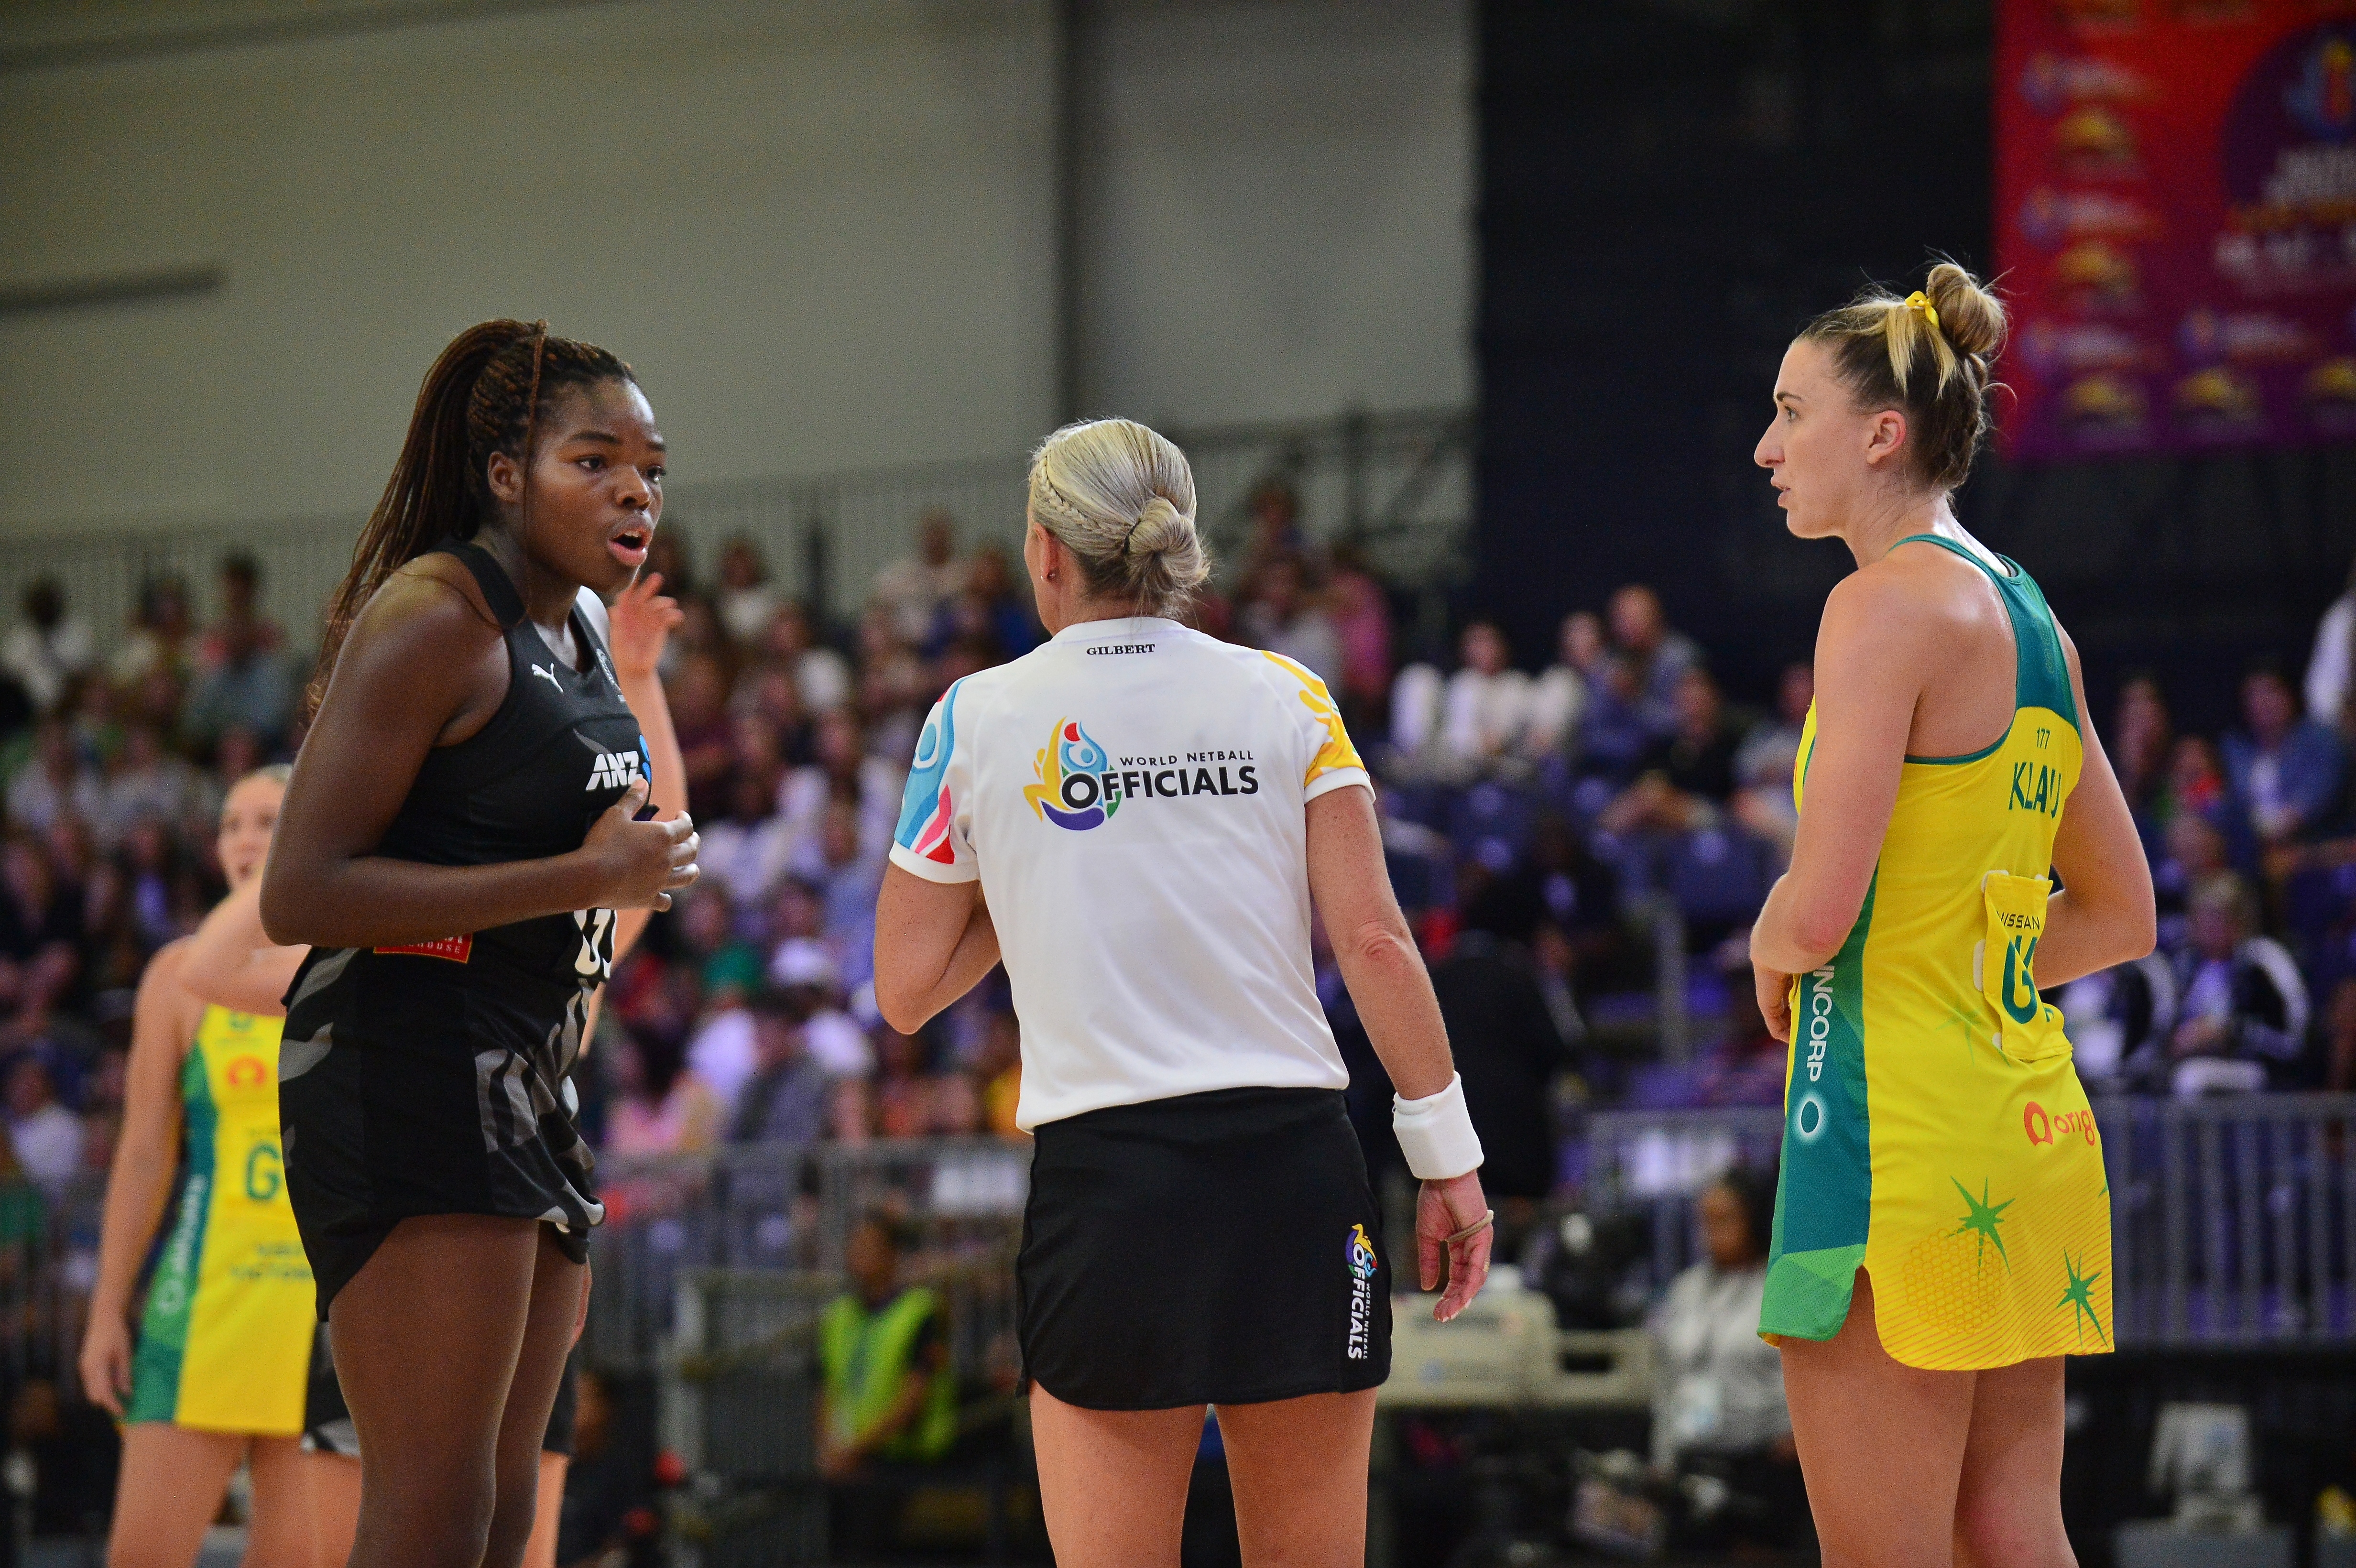 Umpire Anso Kemp chats with Grace Nweke of New Zealand and Courtney Bruce of Australia during the Netball Quad Series final match between Australia and New Zealand at Cape Town International Convention Centre on January 25, 2023 in Cape Town, South Africa. (Photo by Grant Pitcher/Gallo Images/Getty Images)